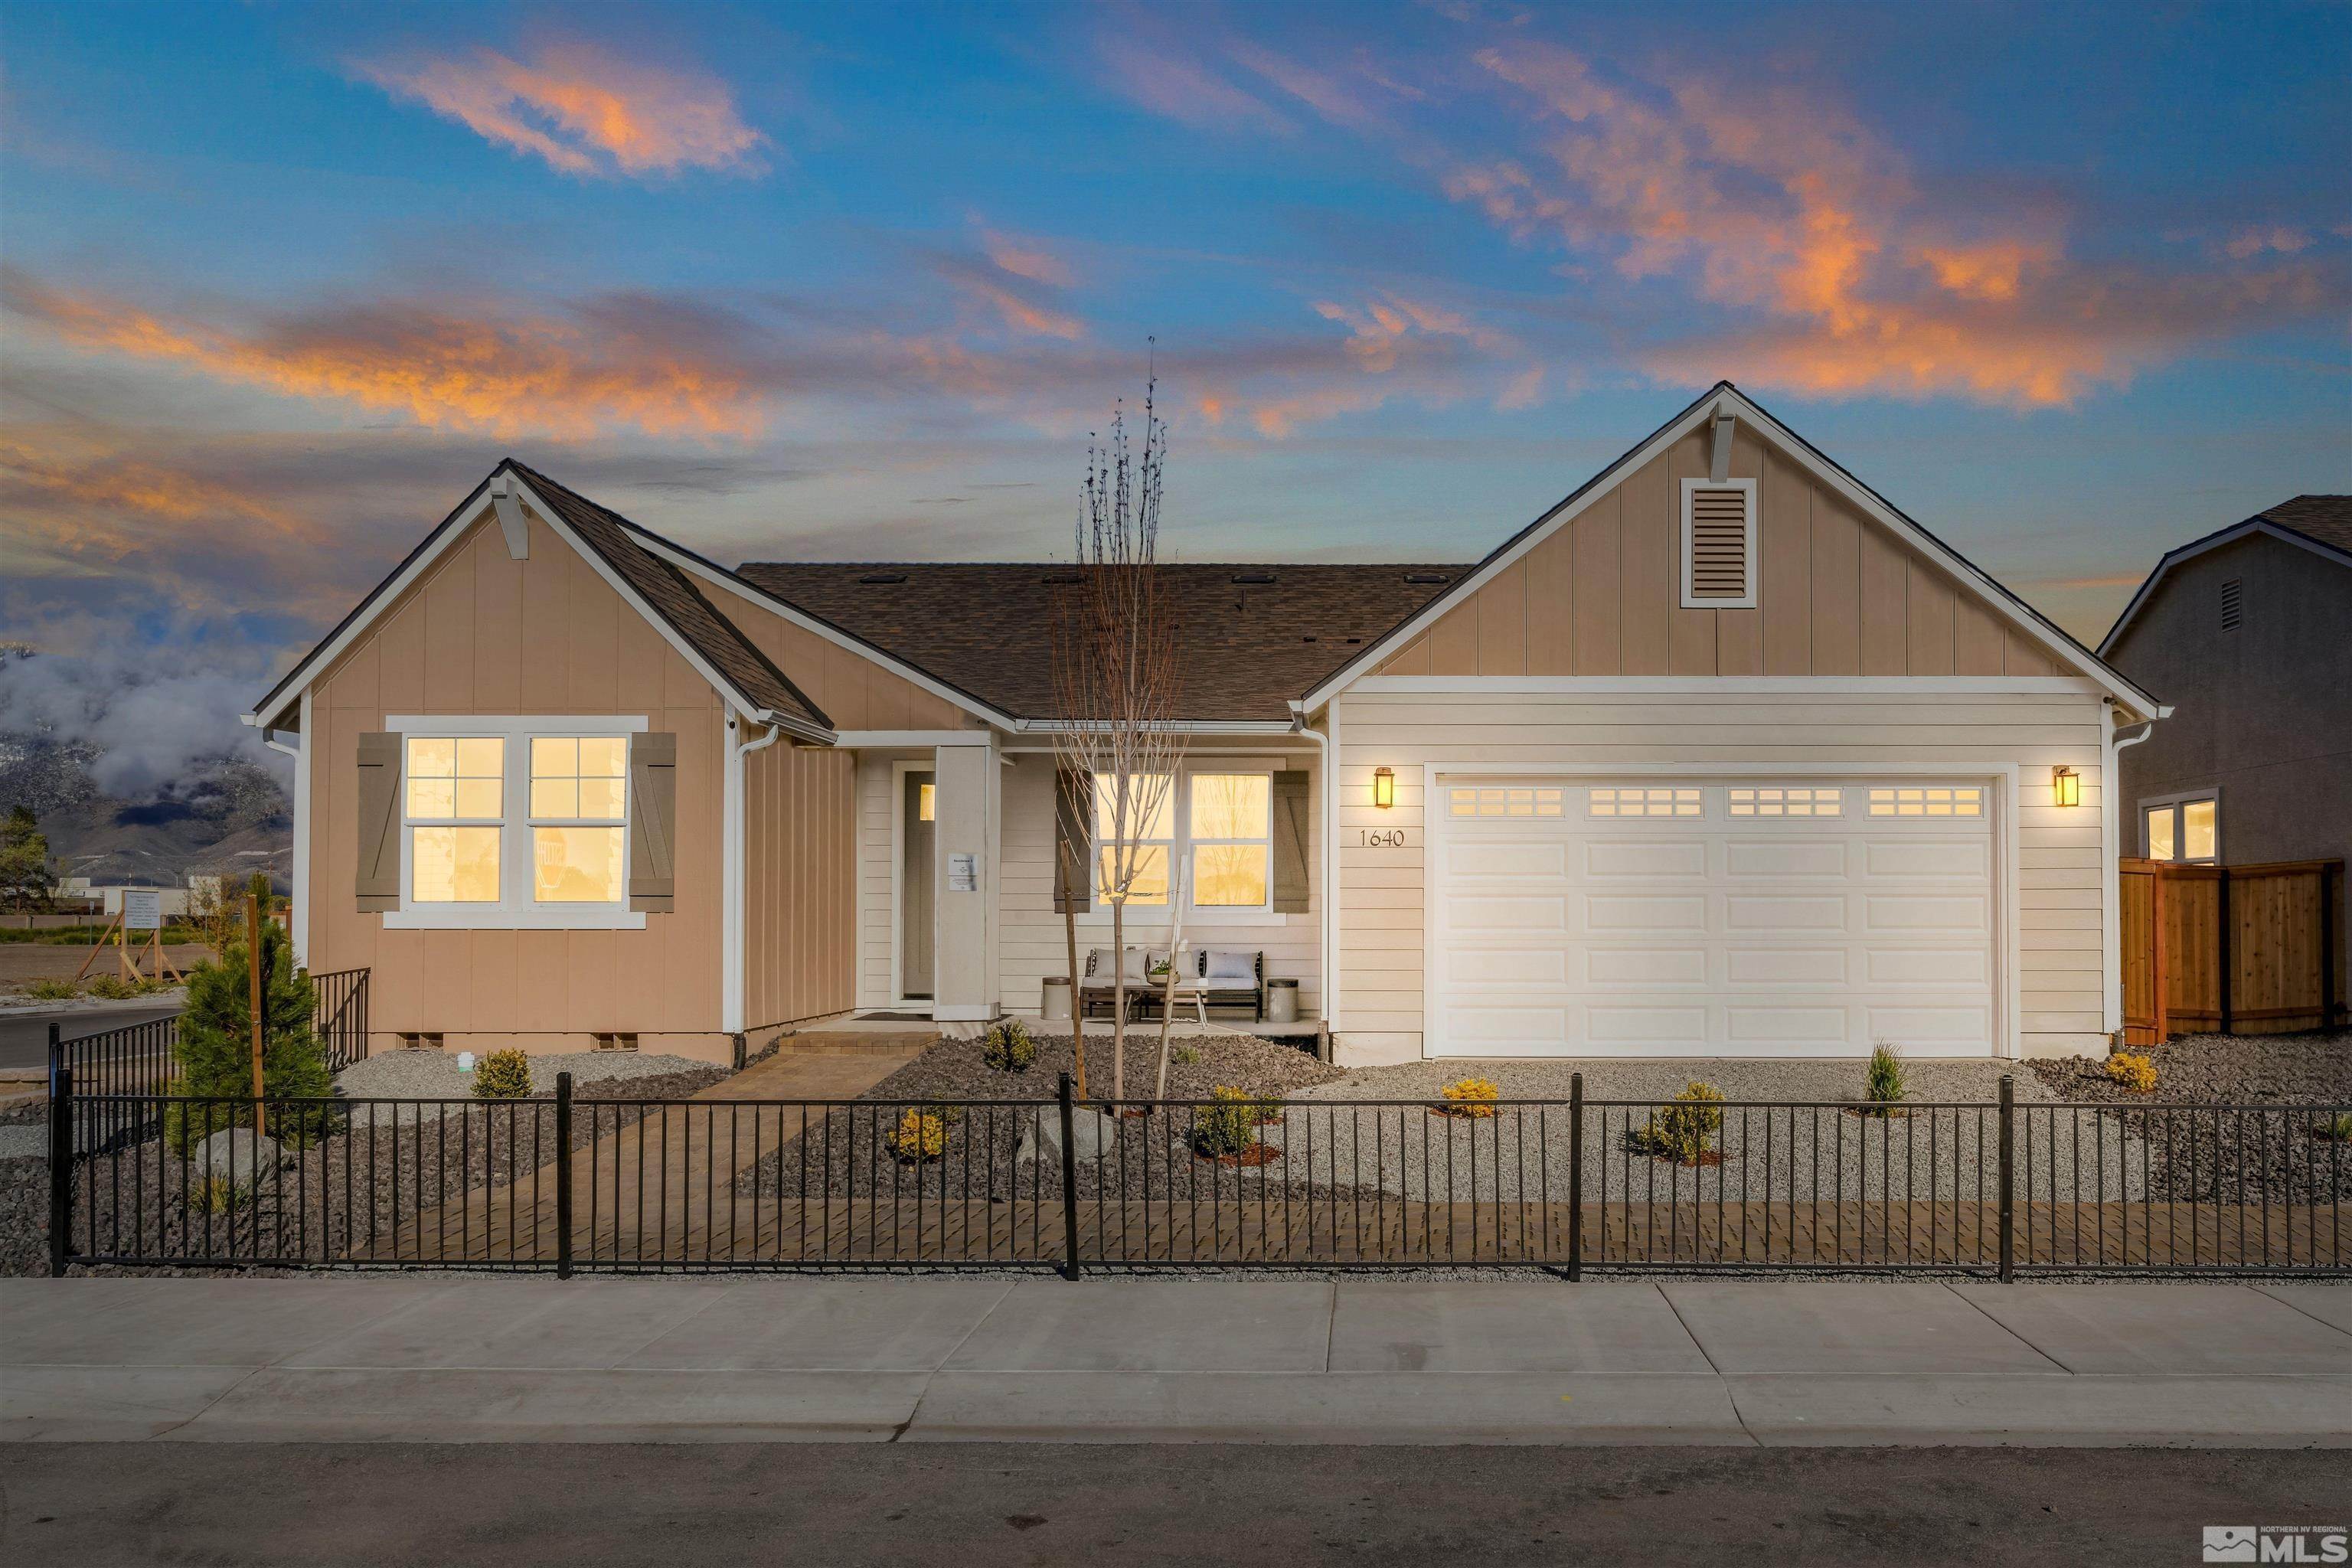 Single Family Homes for Active at 1640 Buttonwillow Minden, Nevada 89423 United States